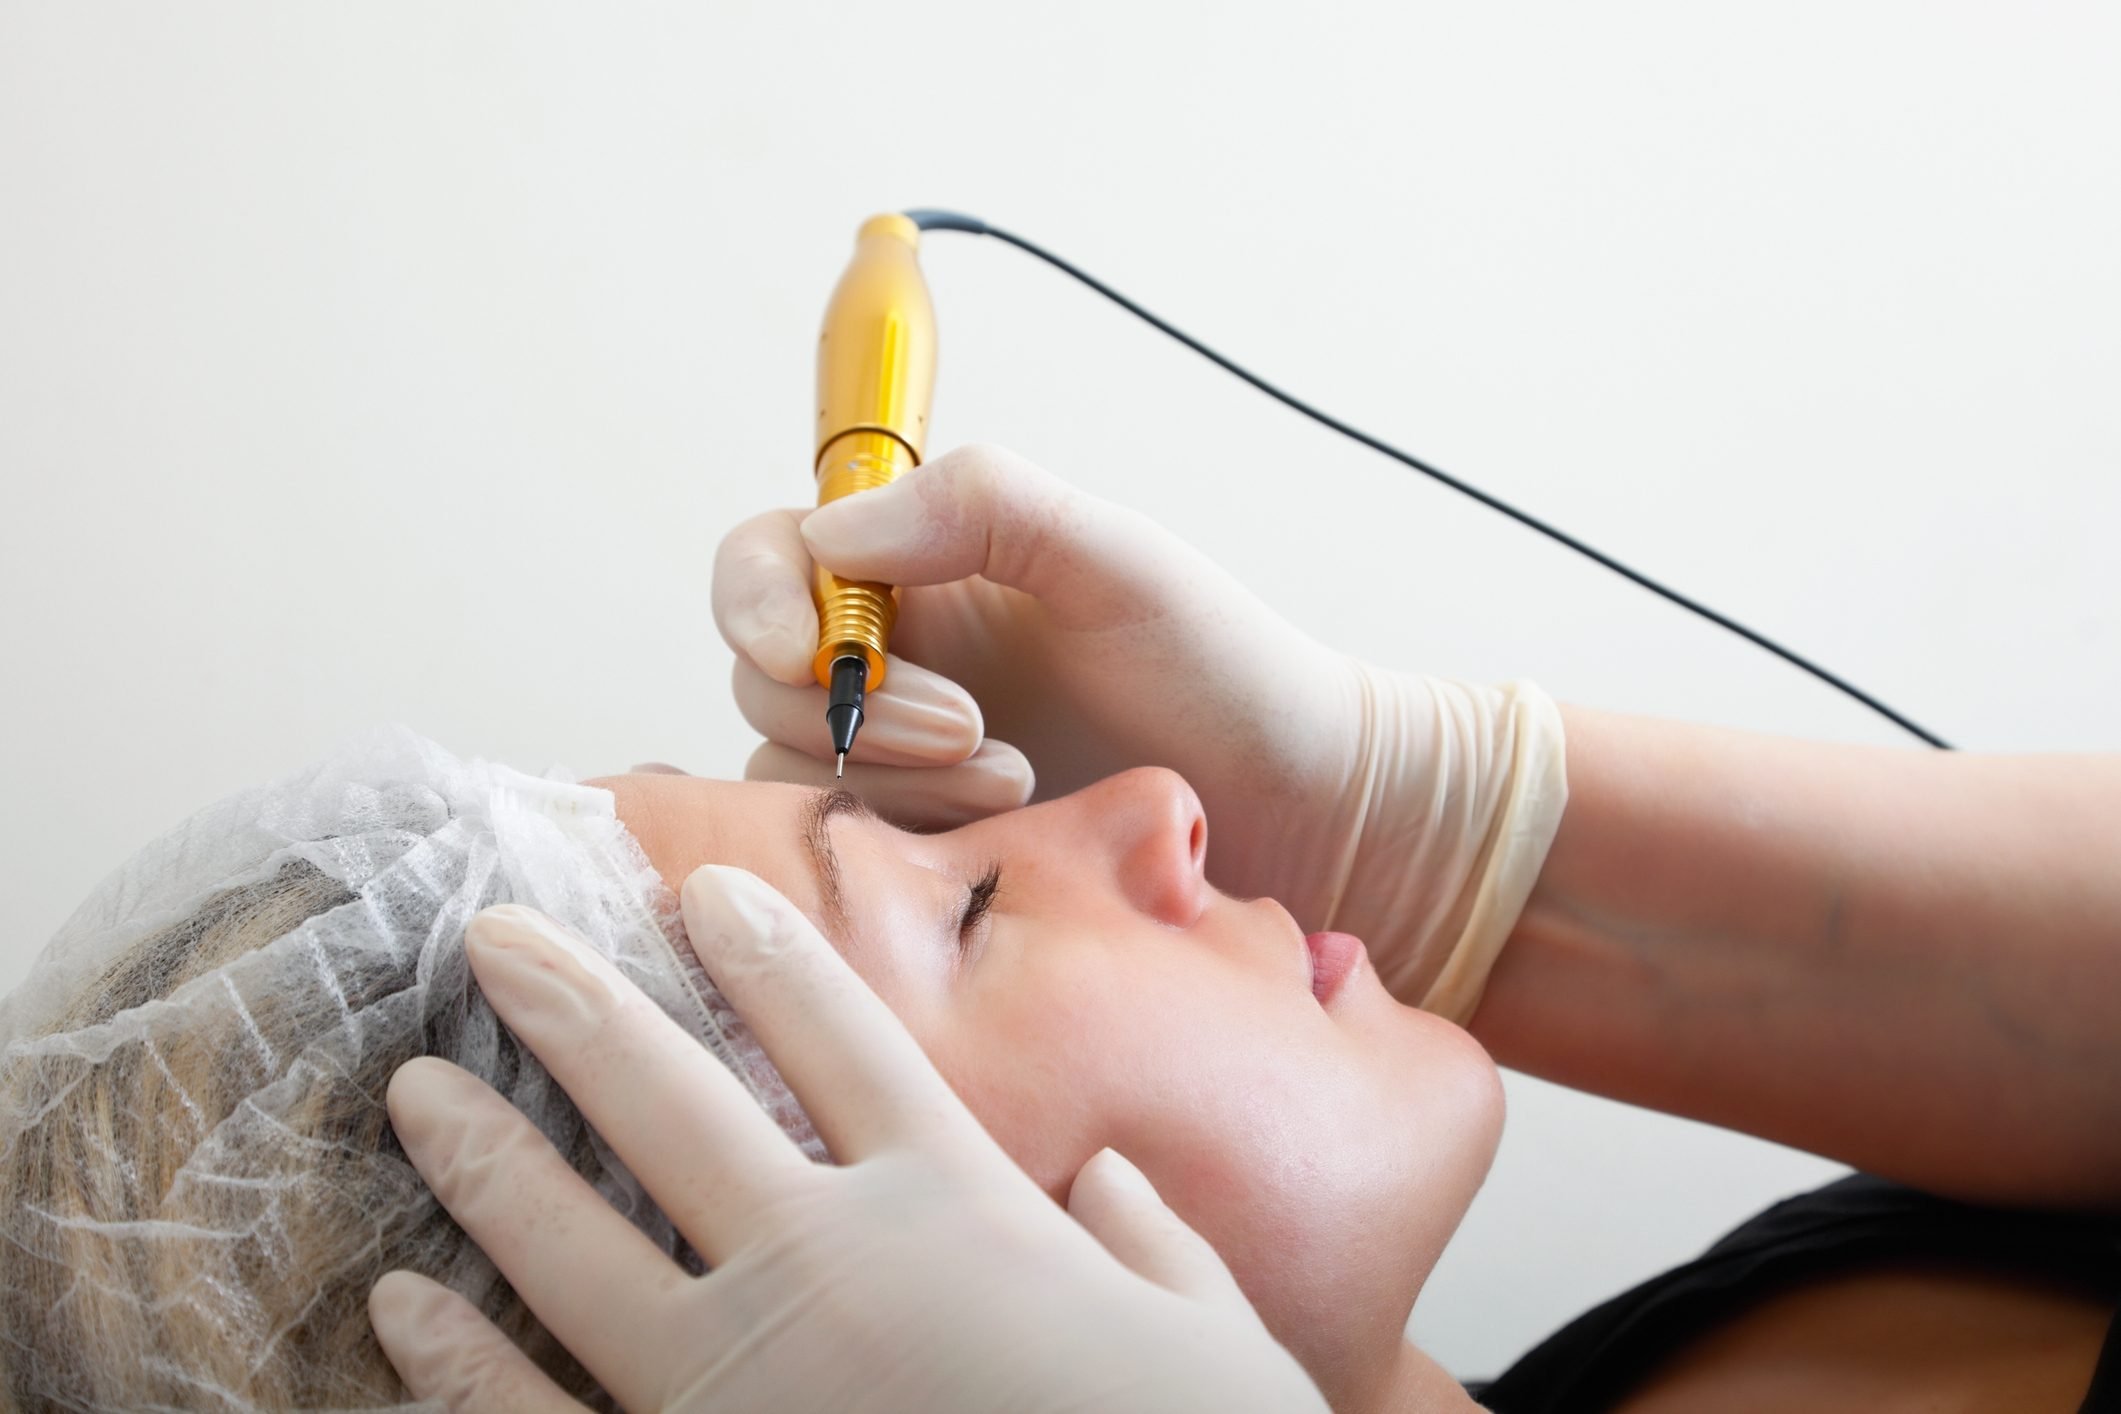 How Safe Is Permanent Makeup?